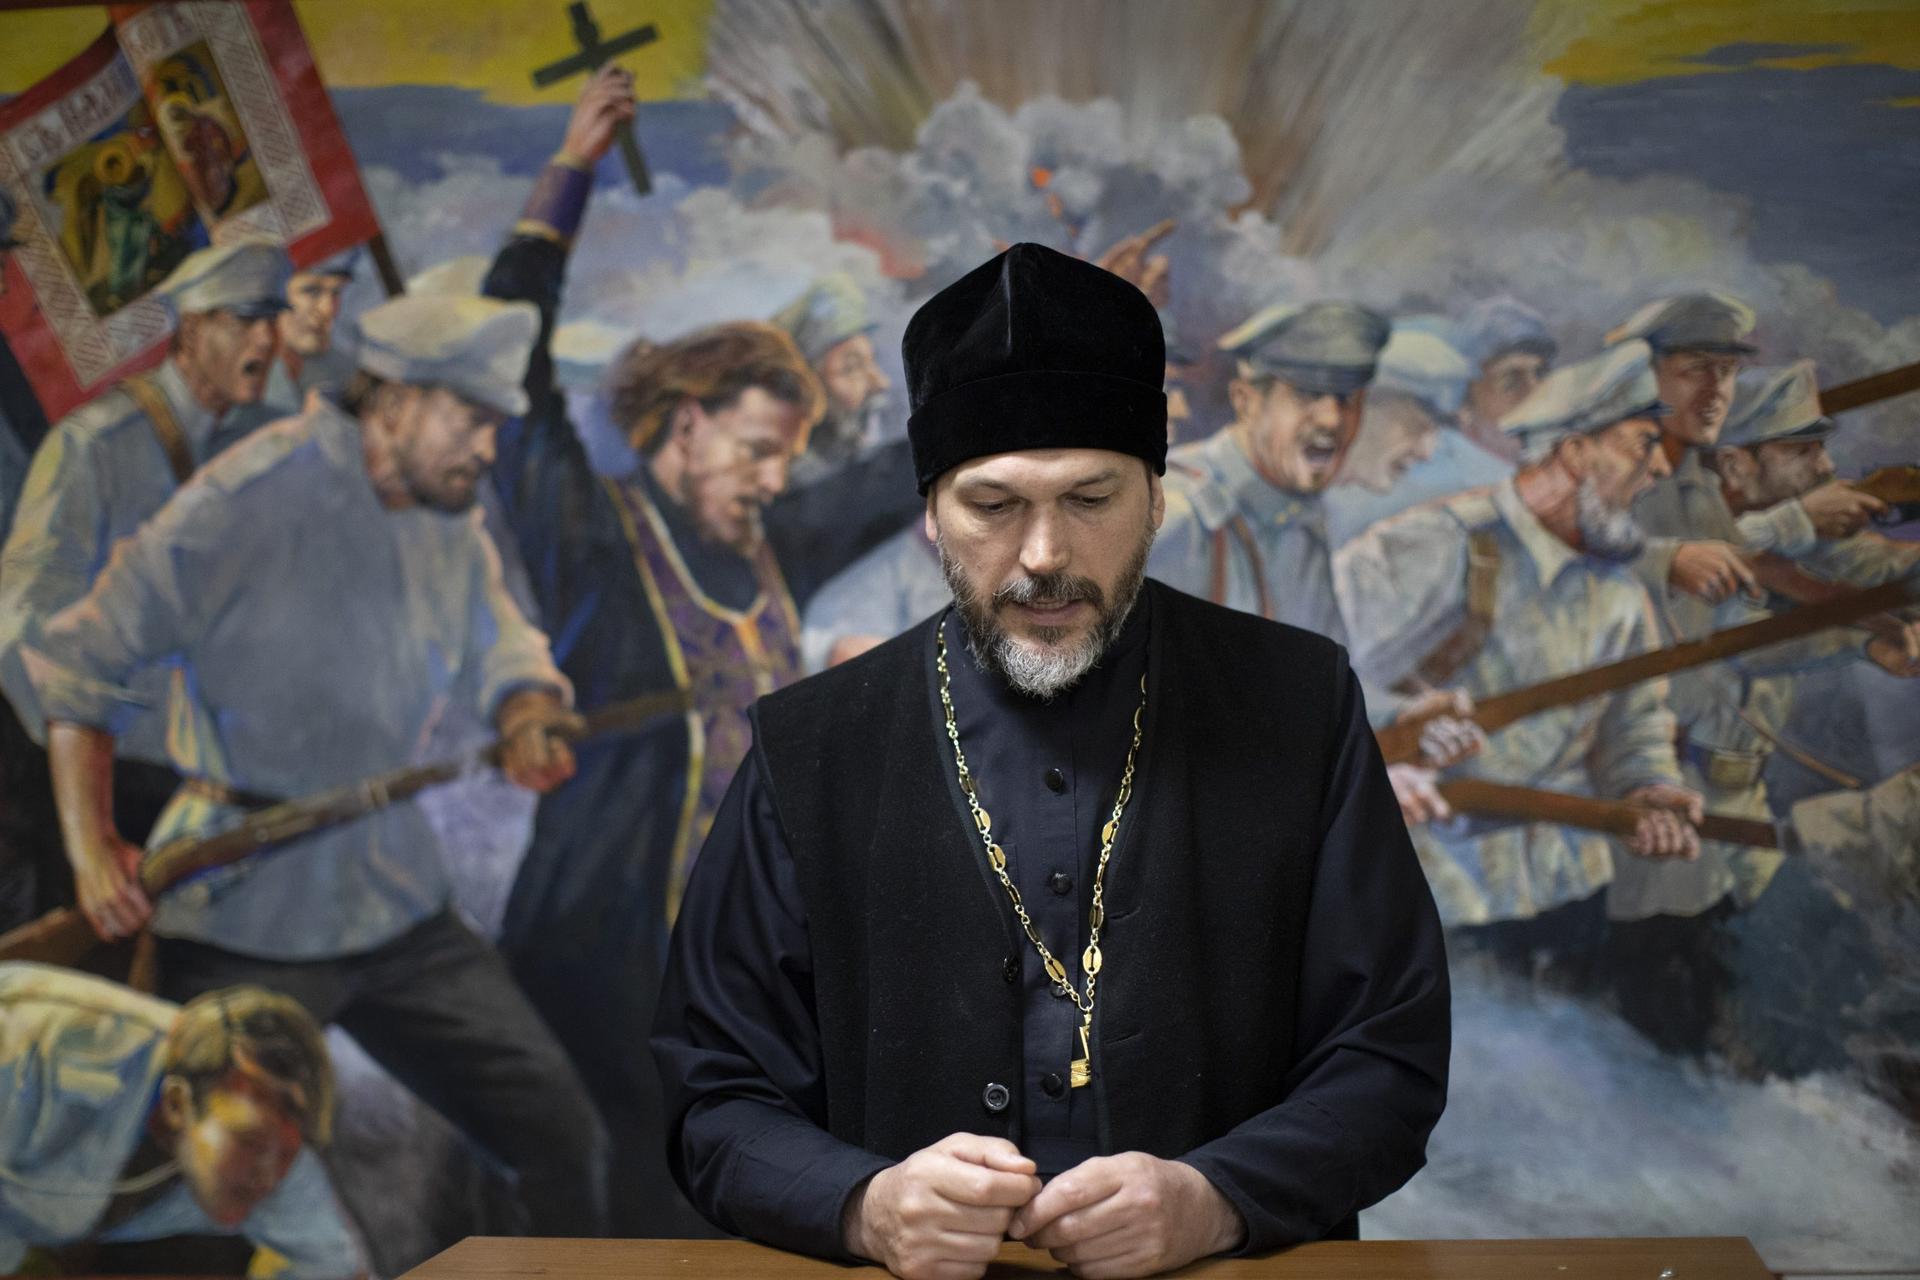 Russian Orthodox priests call for immediate end to war in Ukraine